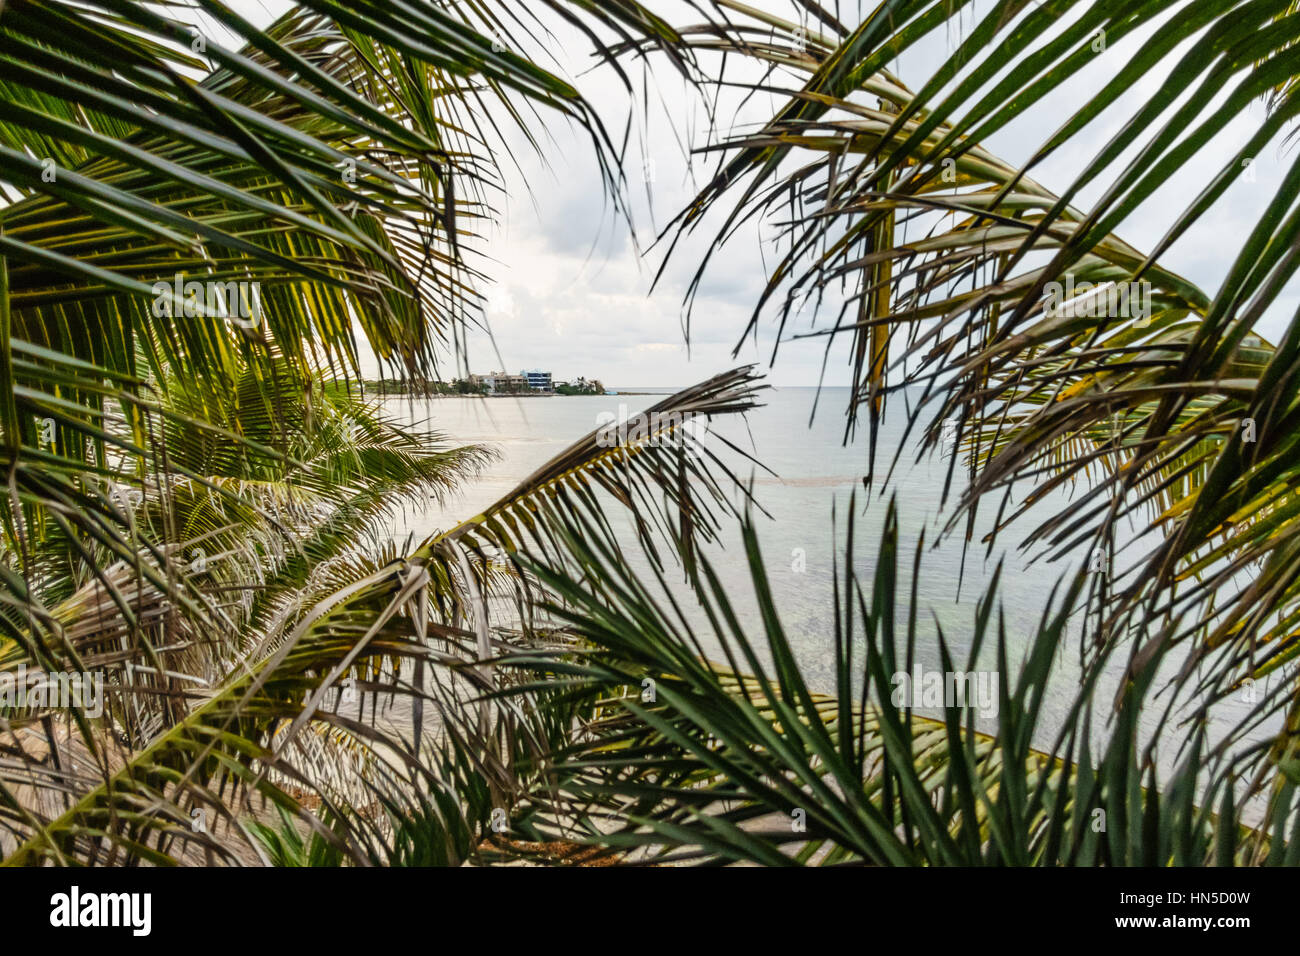 Overlooking Half-moon bay through palm leaves in Akumal (Place of the Turtles) along the Riviera Maya in Quintana Roo, Mexico. Stock Photo